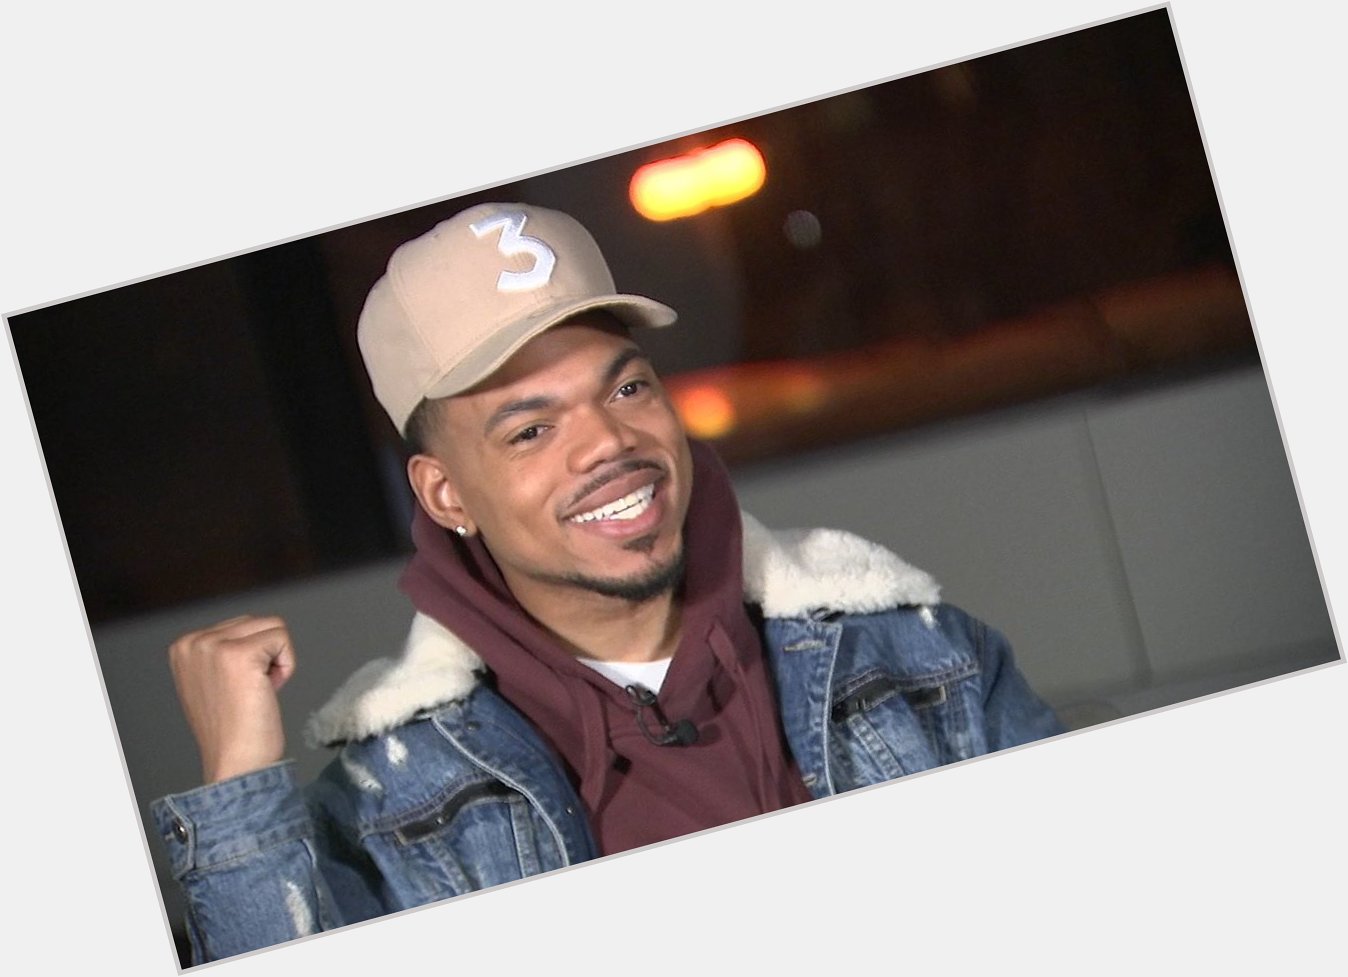 Happy 28th birthday to Chance the Rapper! What s your favorite track by Chance?   